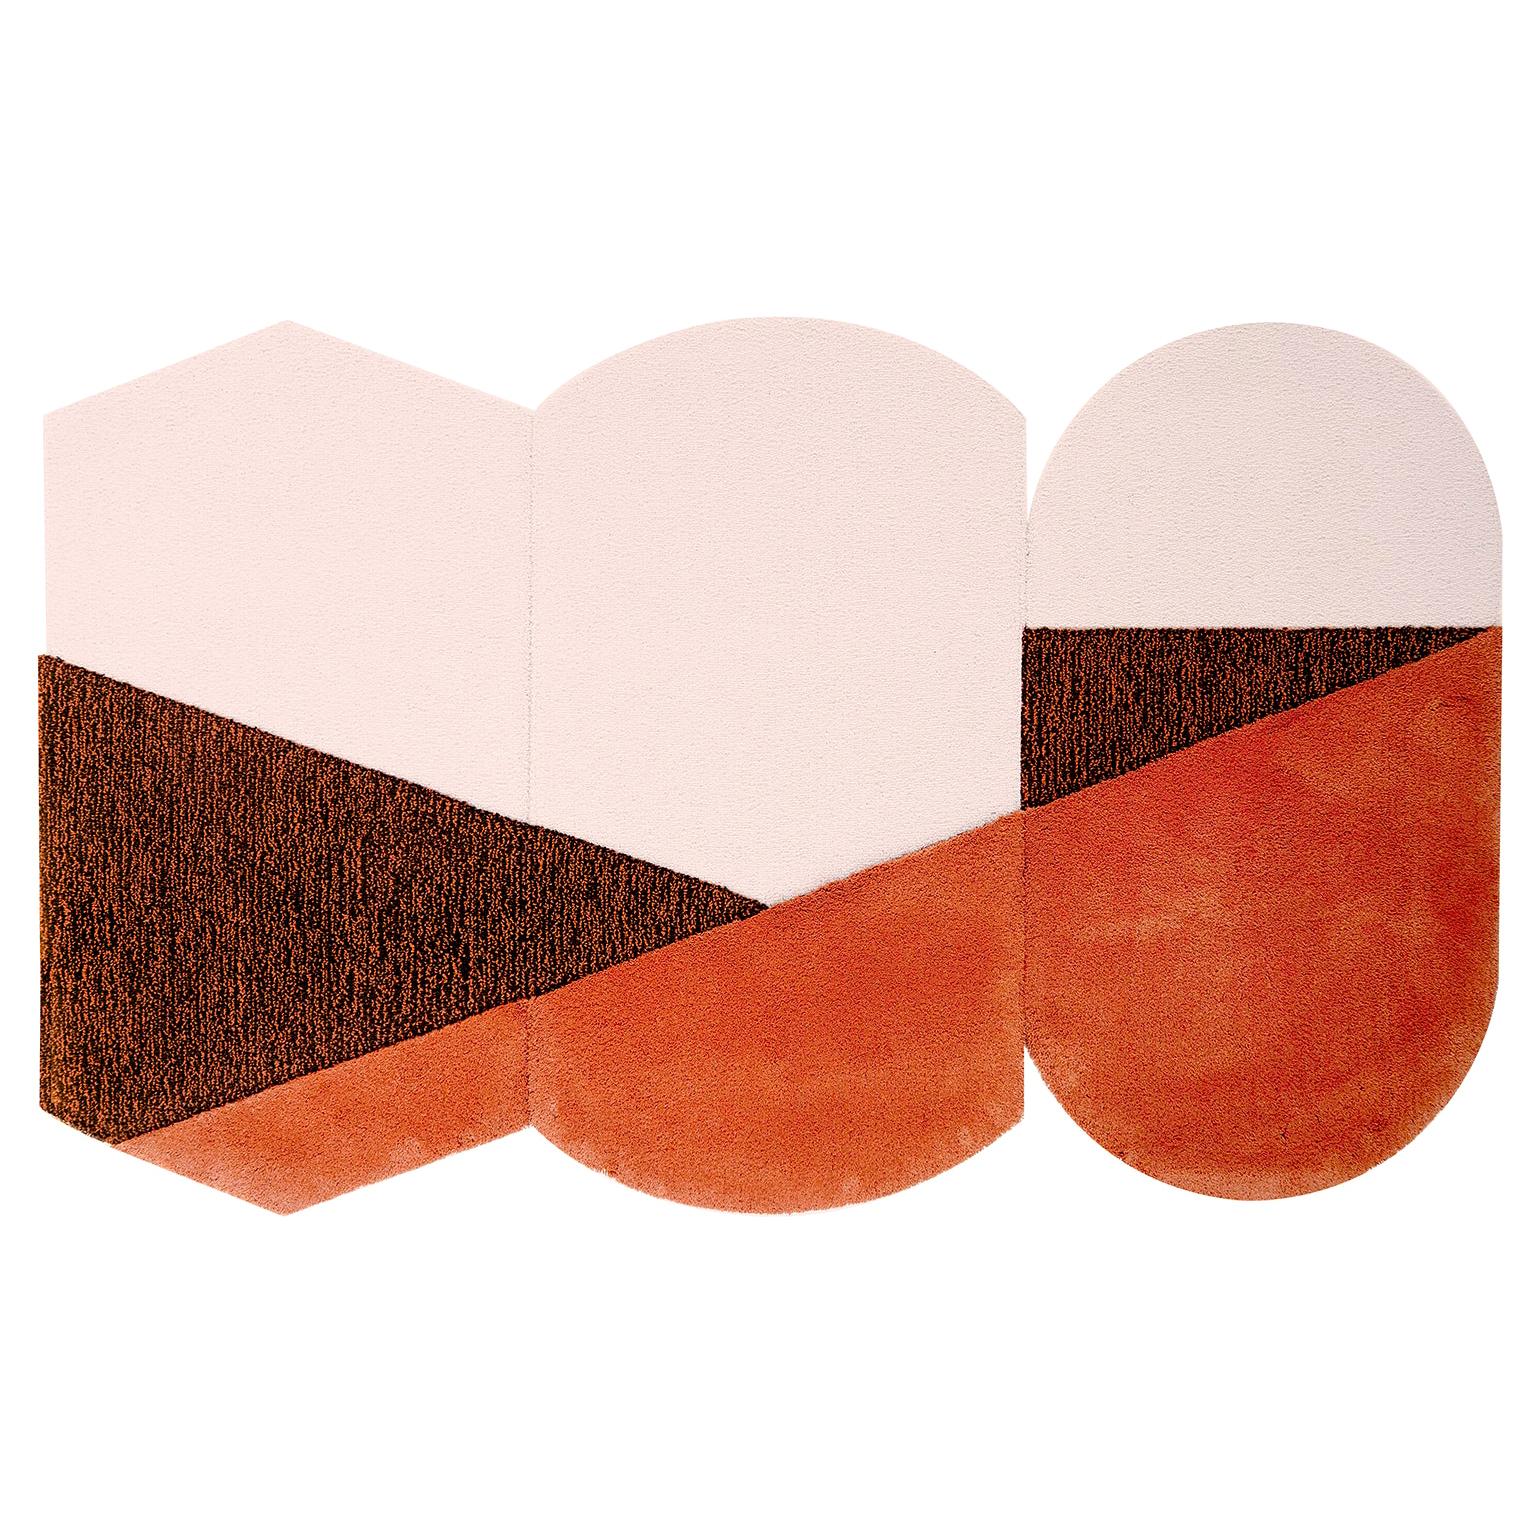 OCI Triptych S, Composition of 3 Rugs 100% Wool / Brick Brown Pink by Portego For Sale